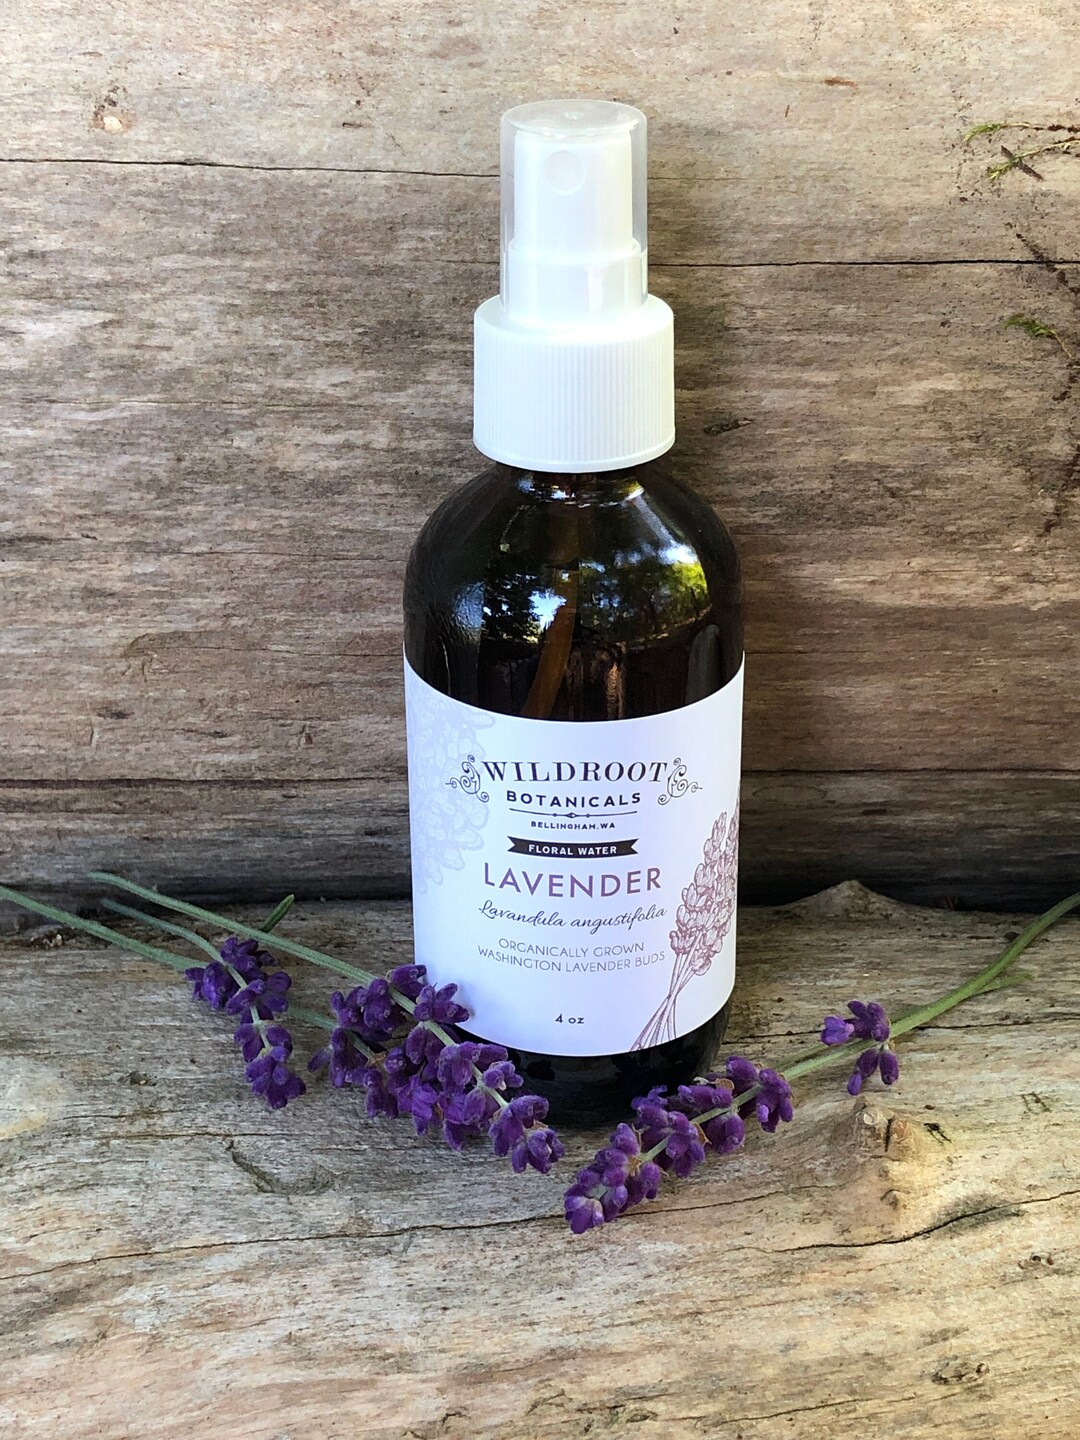 French Lavender Body & Linen Spray - 4oz Glass Spray Bottle - 94% Organic  Content - Lavandula Angustifolia Aromatherapy Mist - Safe for Kids and Pets